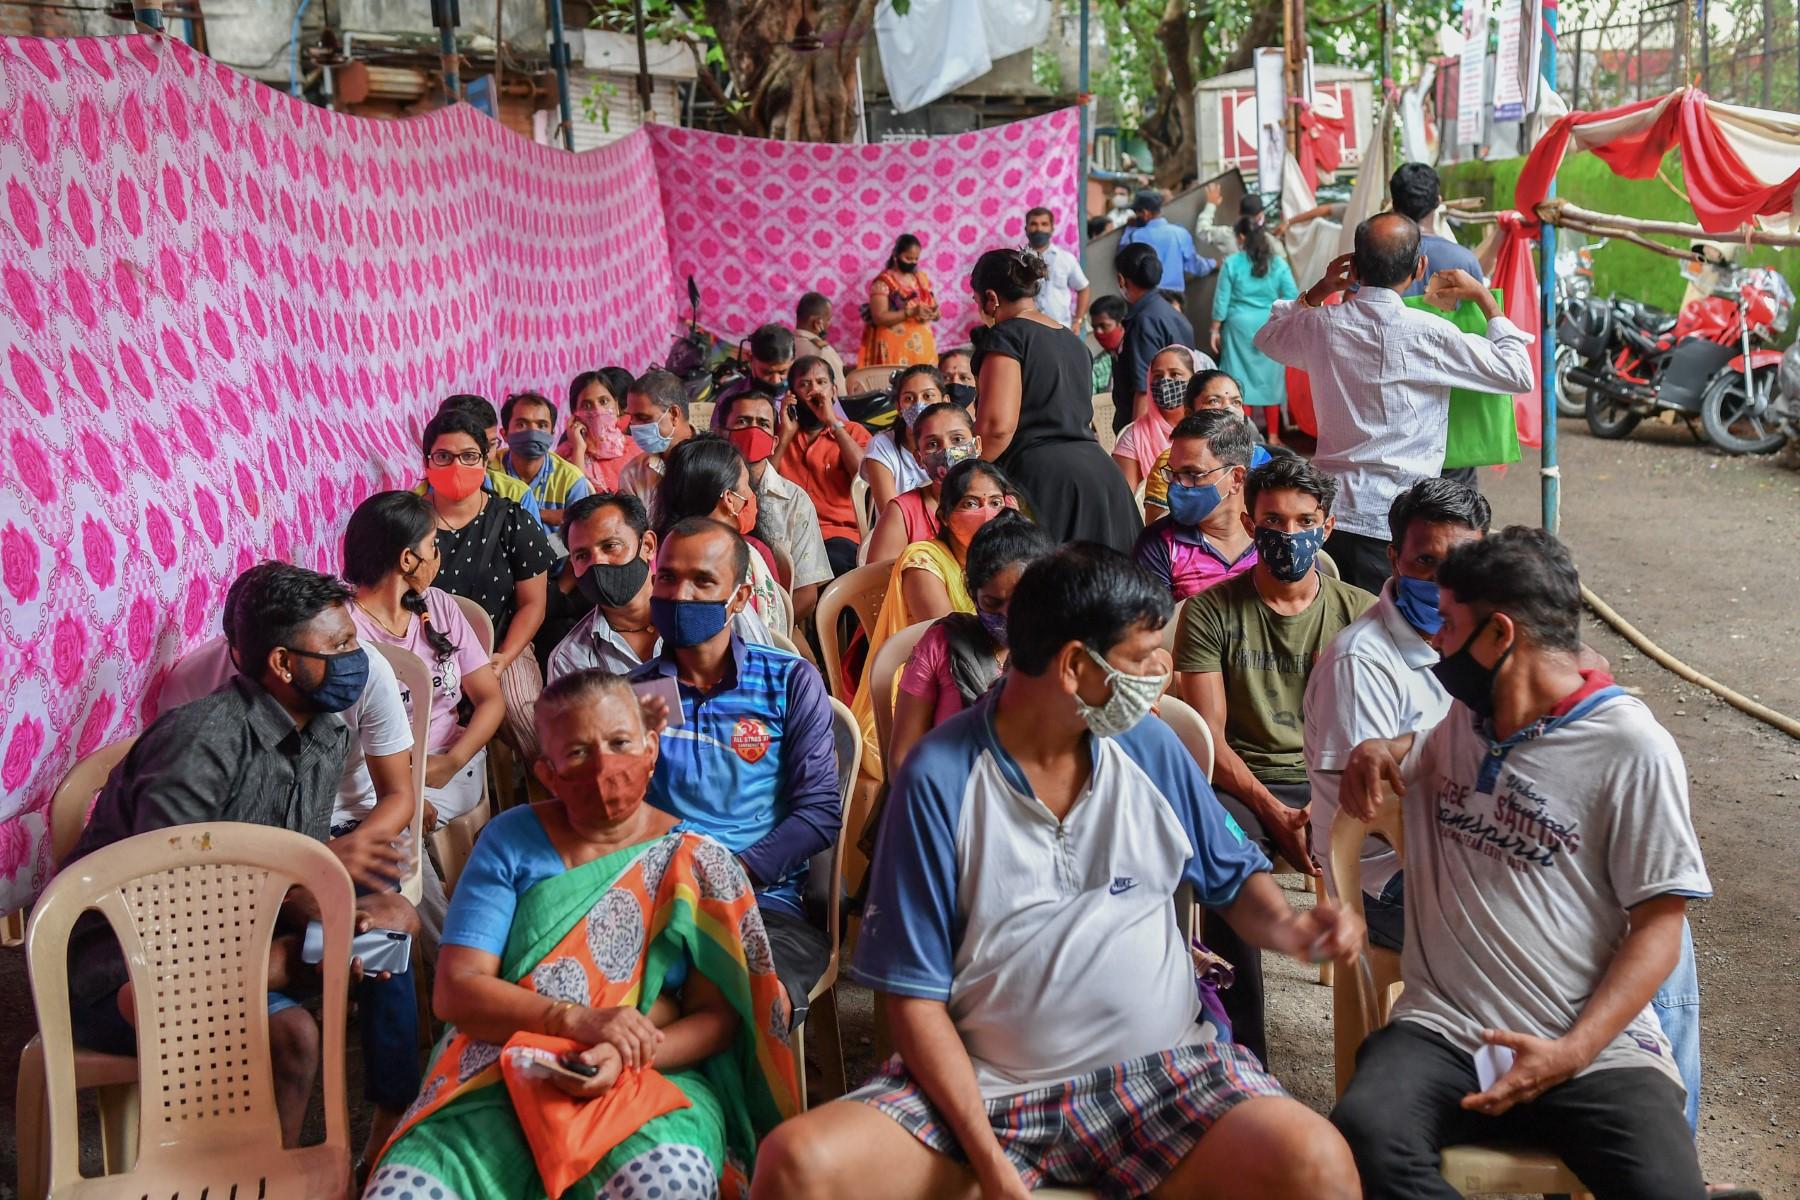 Residents await for the arrival of daily doses after a hiatus to get inoculated with a dose of the Covishield, AstraZeneca-Oxford's Covid-19 coronavirus vaccine, during a vaccination drive in Mumbai July 12, 2021. Photo: AFP